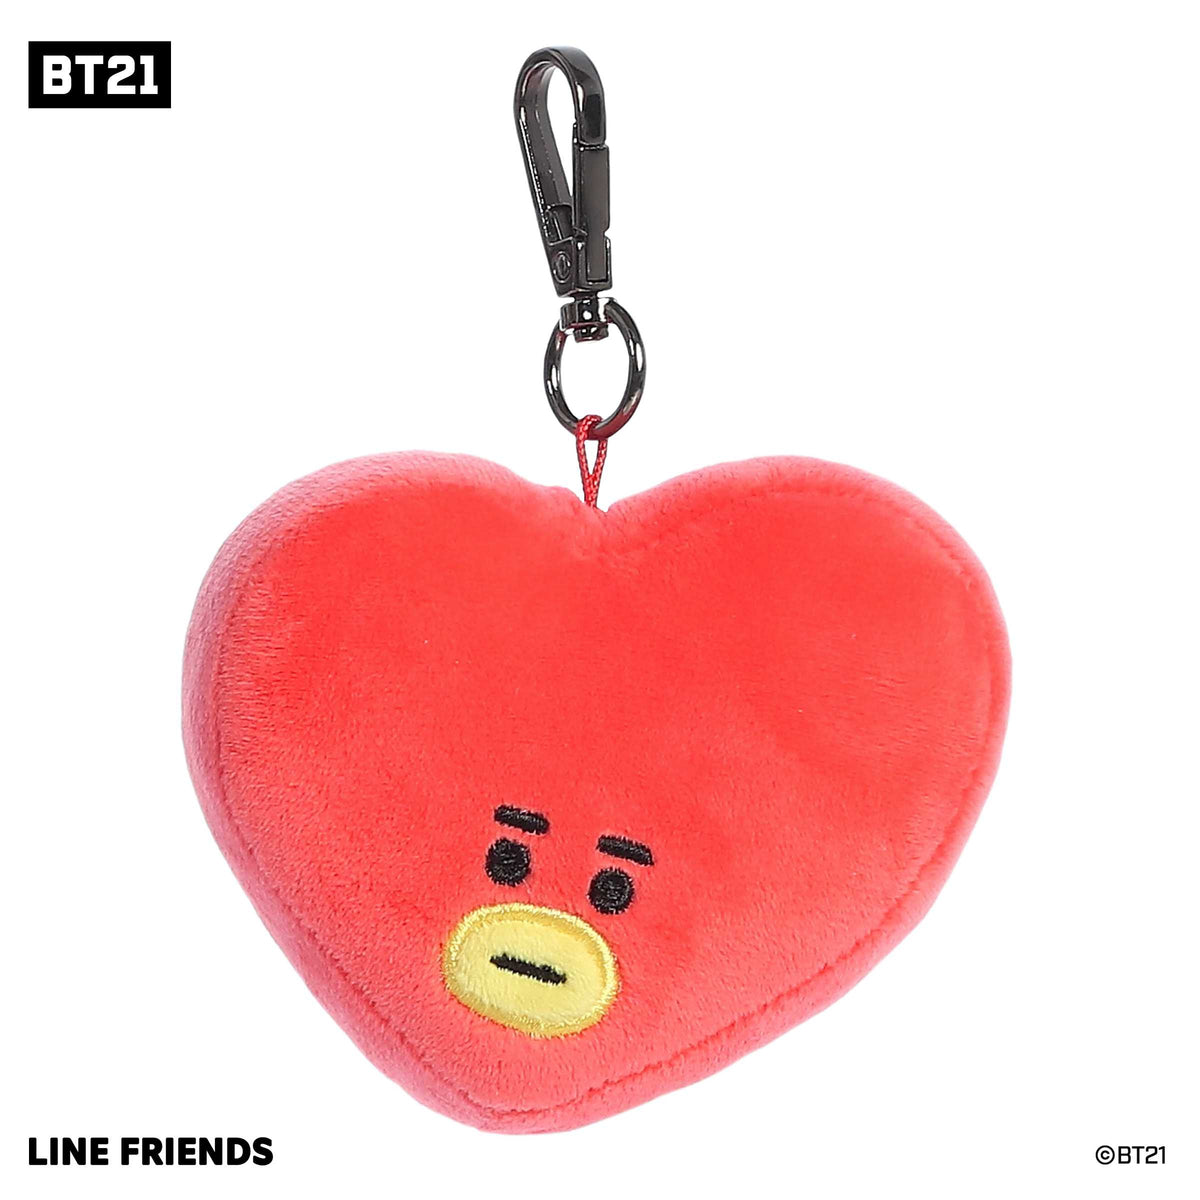 Trendy BT21 plush Clip-On with a heart-shaped red soft body, black and yellow accents on face, and an attached metal hook